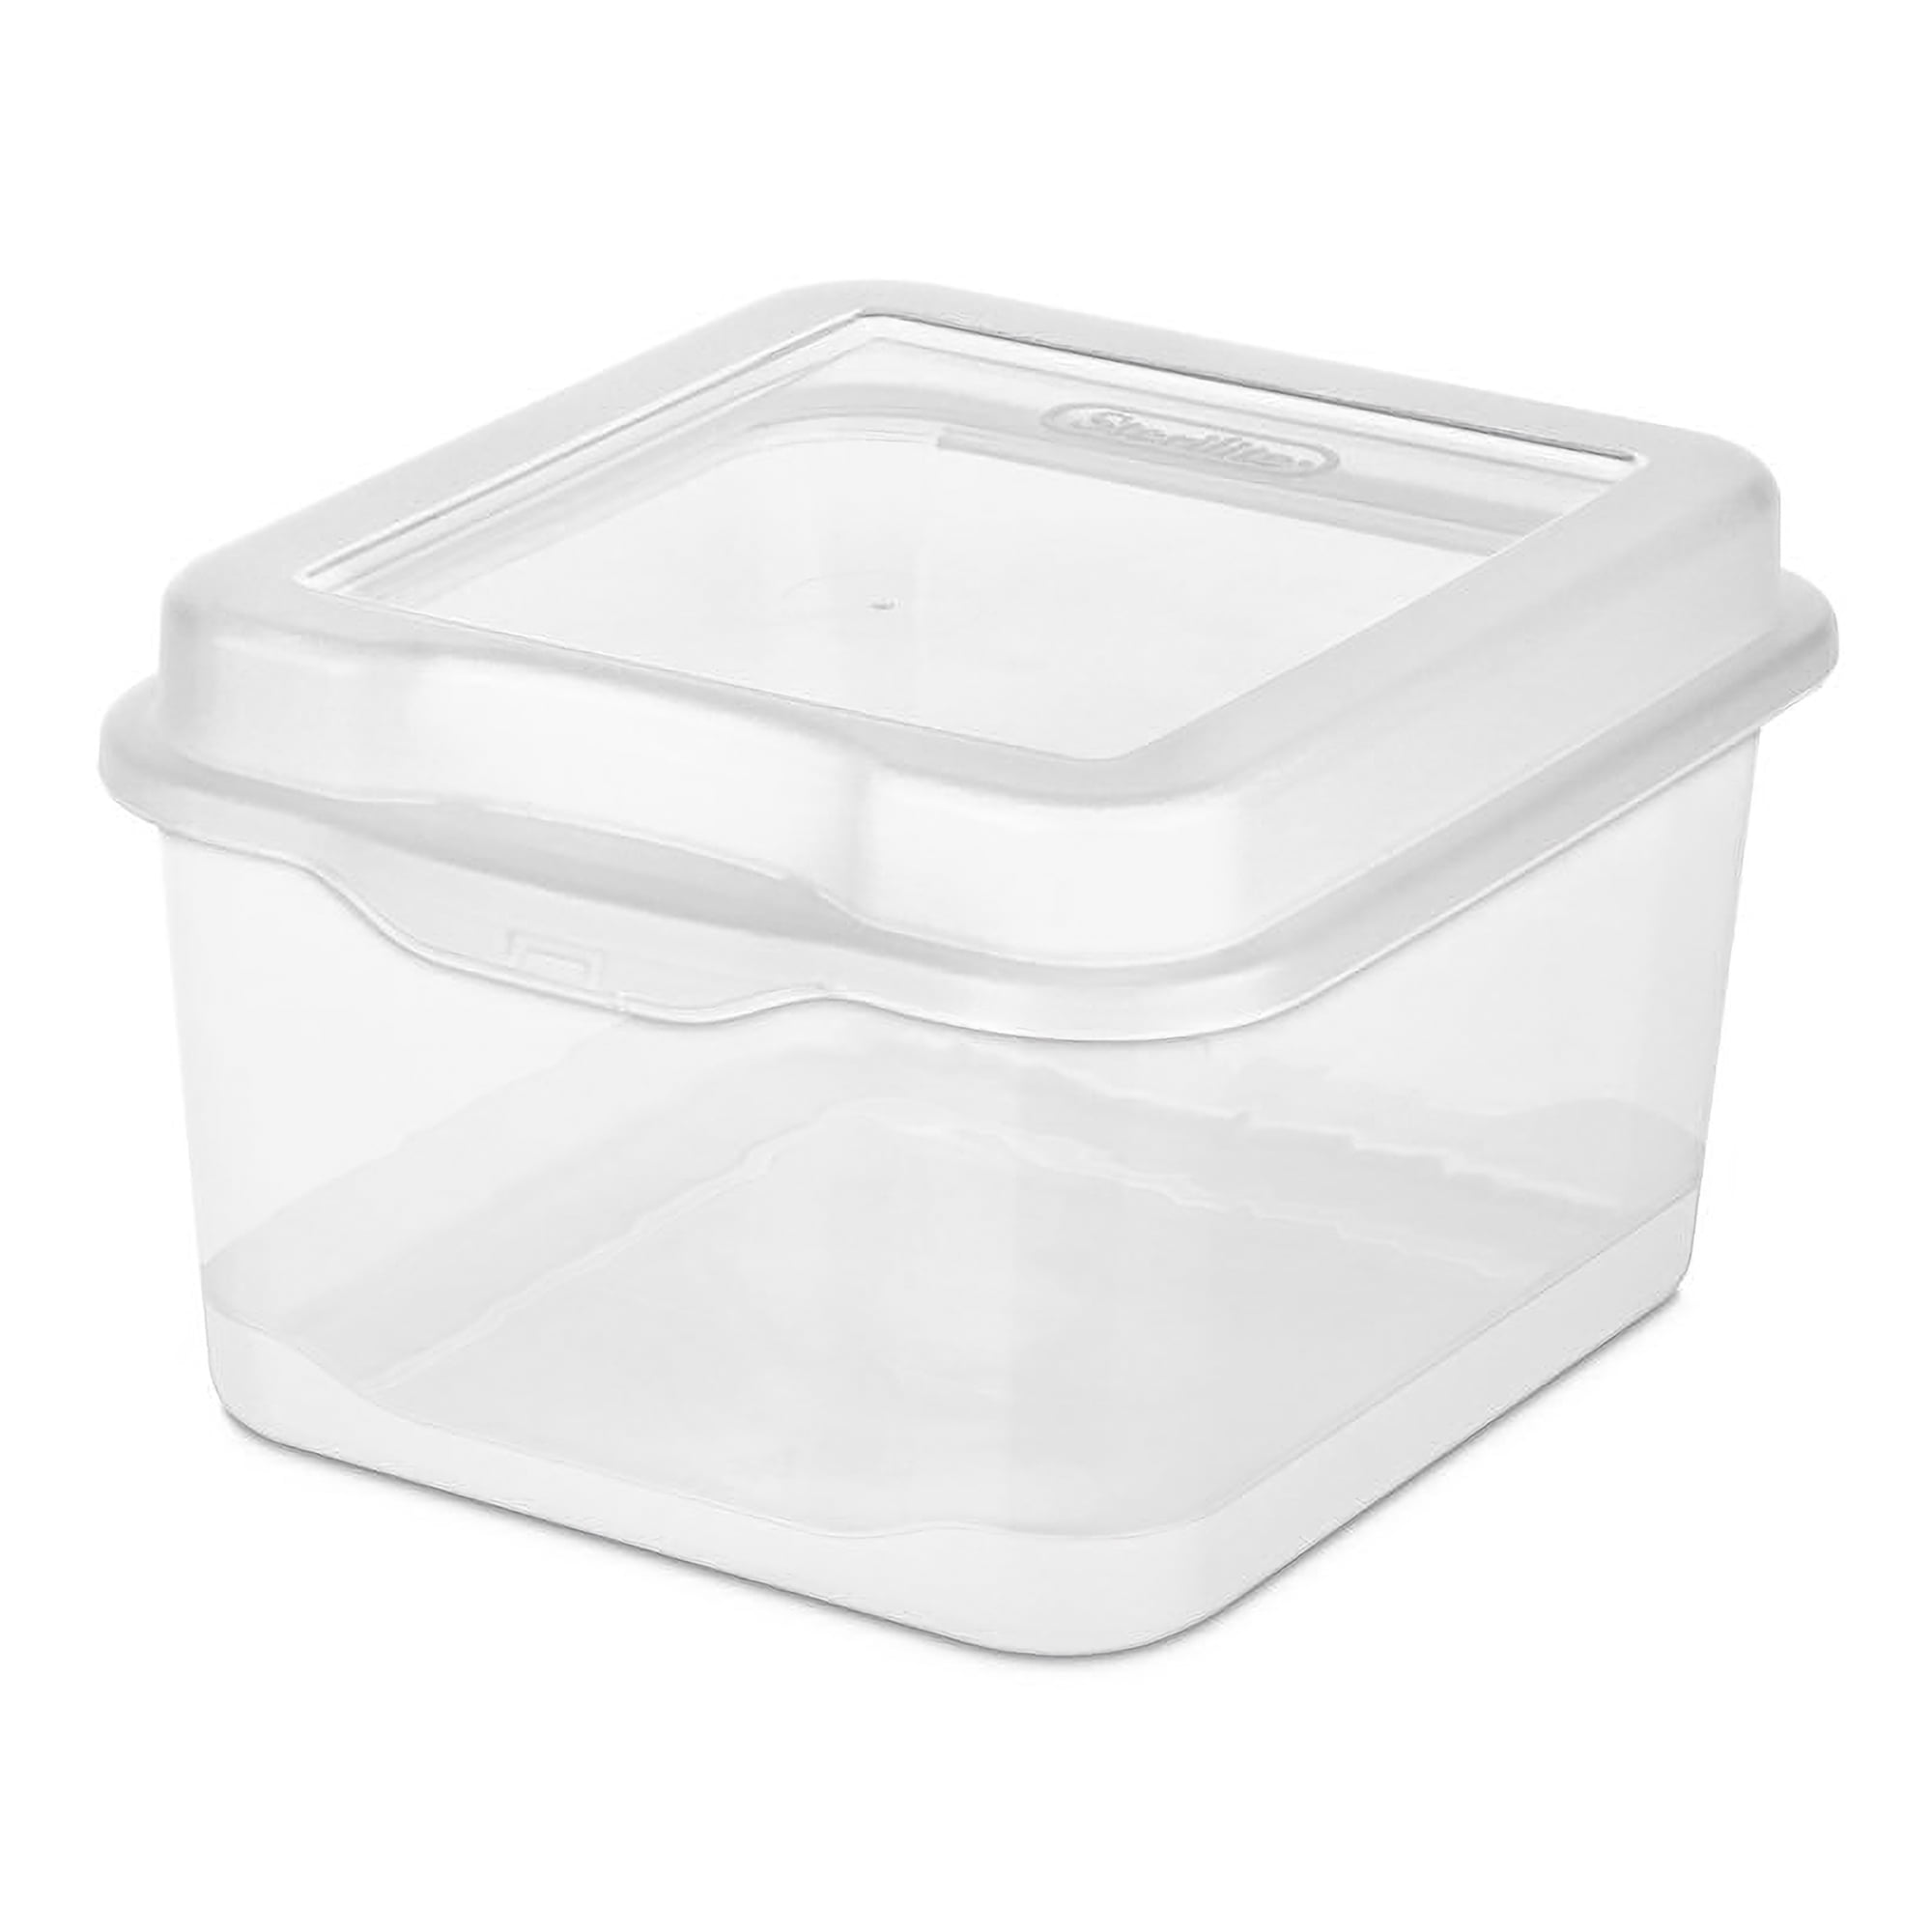 Stacking Box Clear /Hinged Lid Pet Food Storage Loose Bin Container Box set of 5 